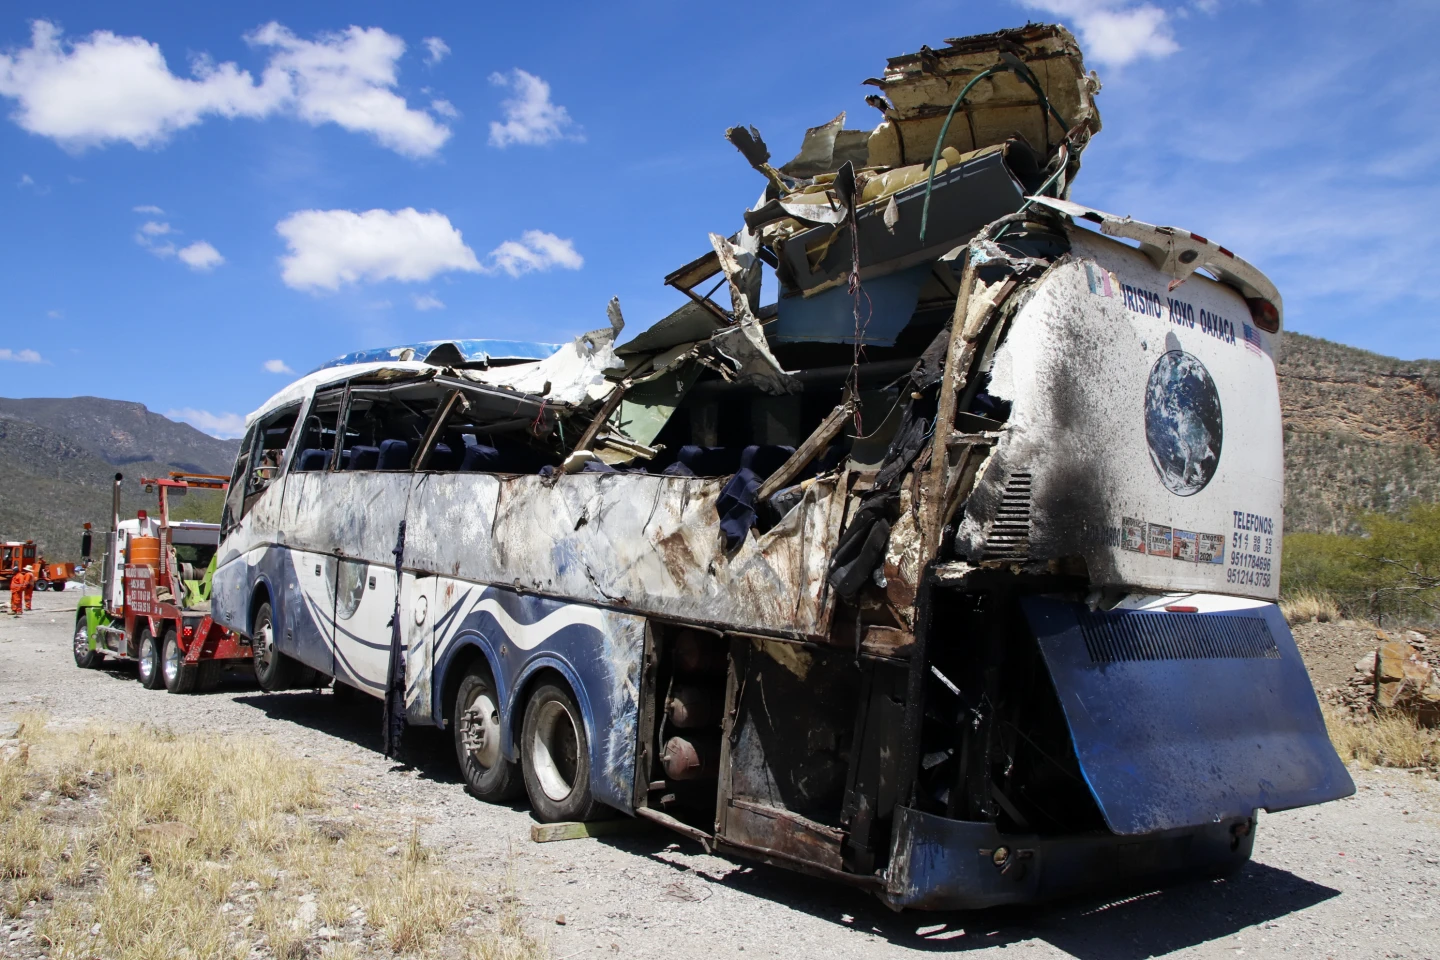 16 migrants die in bus crash in southern Mexico